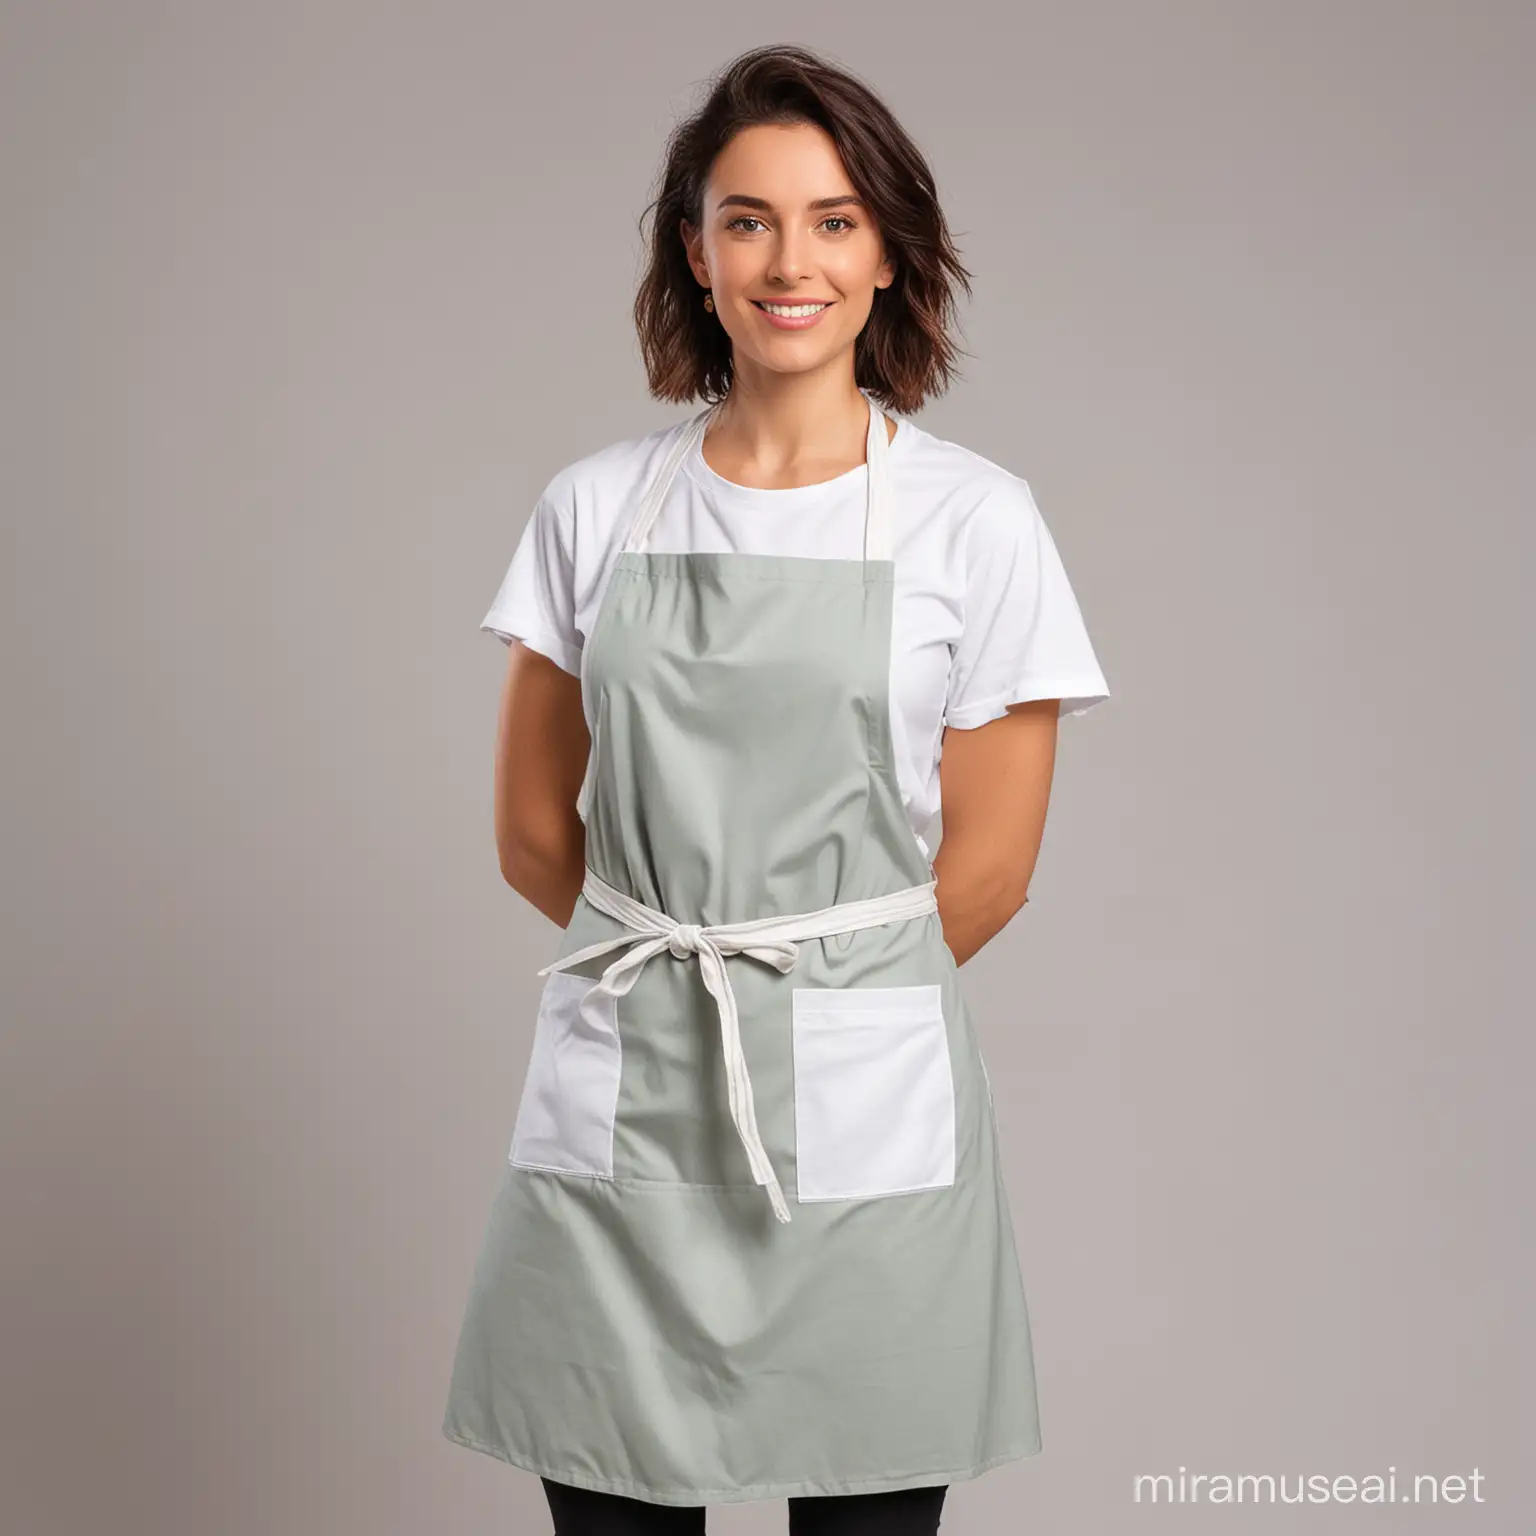 Woman Posing with White Apron and TShirt on White Background